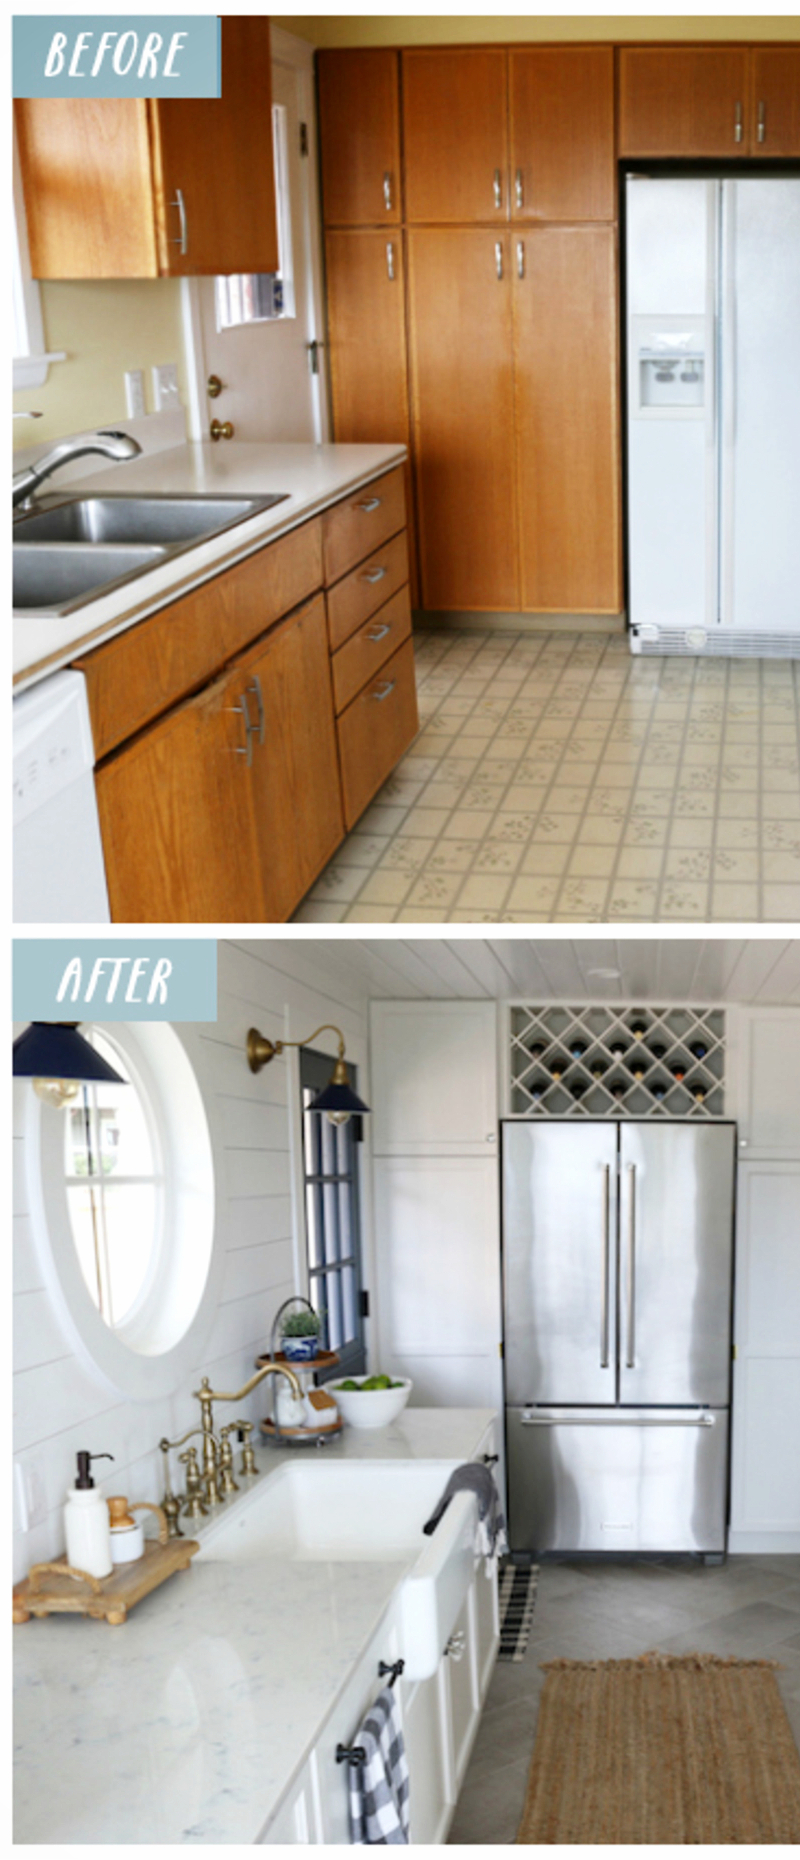 Small kitchen makeovers before and after - small kitchens remodel ideas and pictures #kitchenideas #farmhousedecor #kitchendecor #kitchenremodel #diyhomedecor #homedecorideas #farmhousekitchen